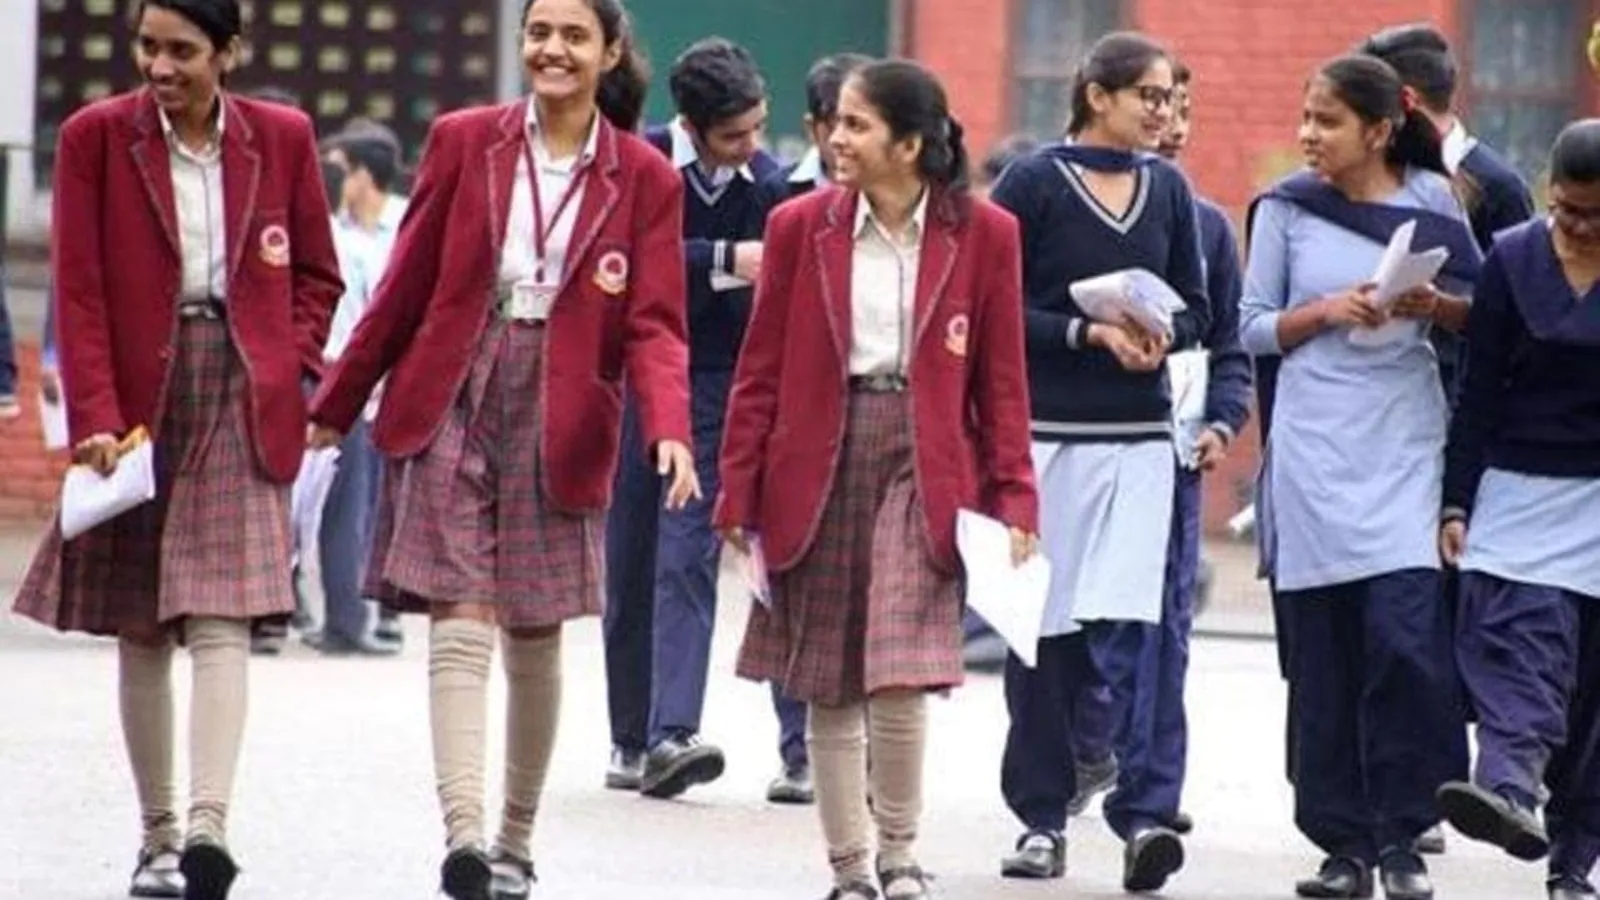 CBSE Class 12 term 1 results 2022 live updates: After 10th, 12th scores soon